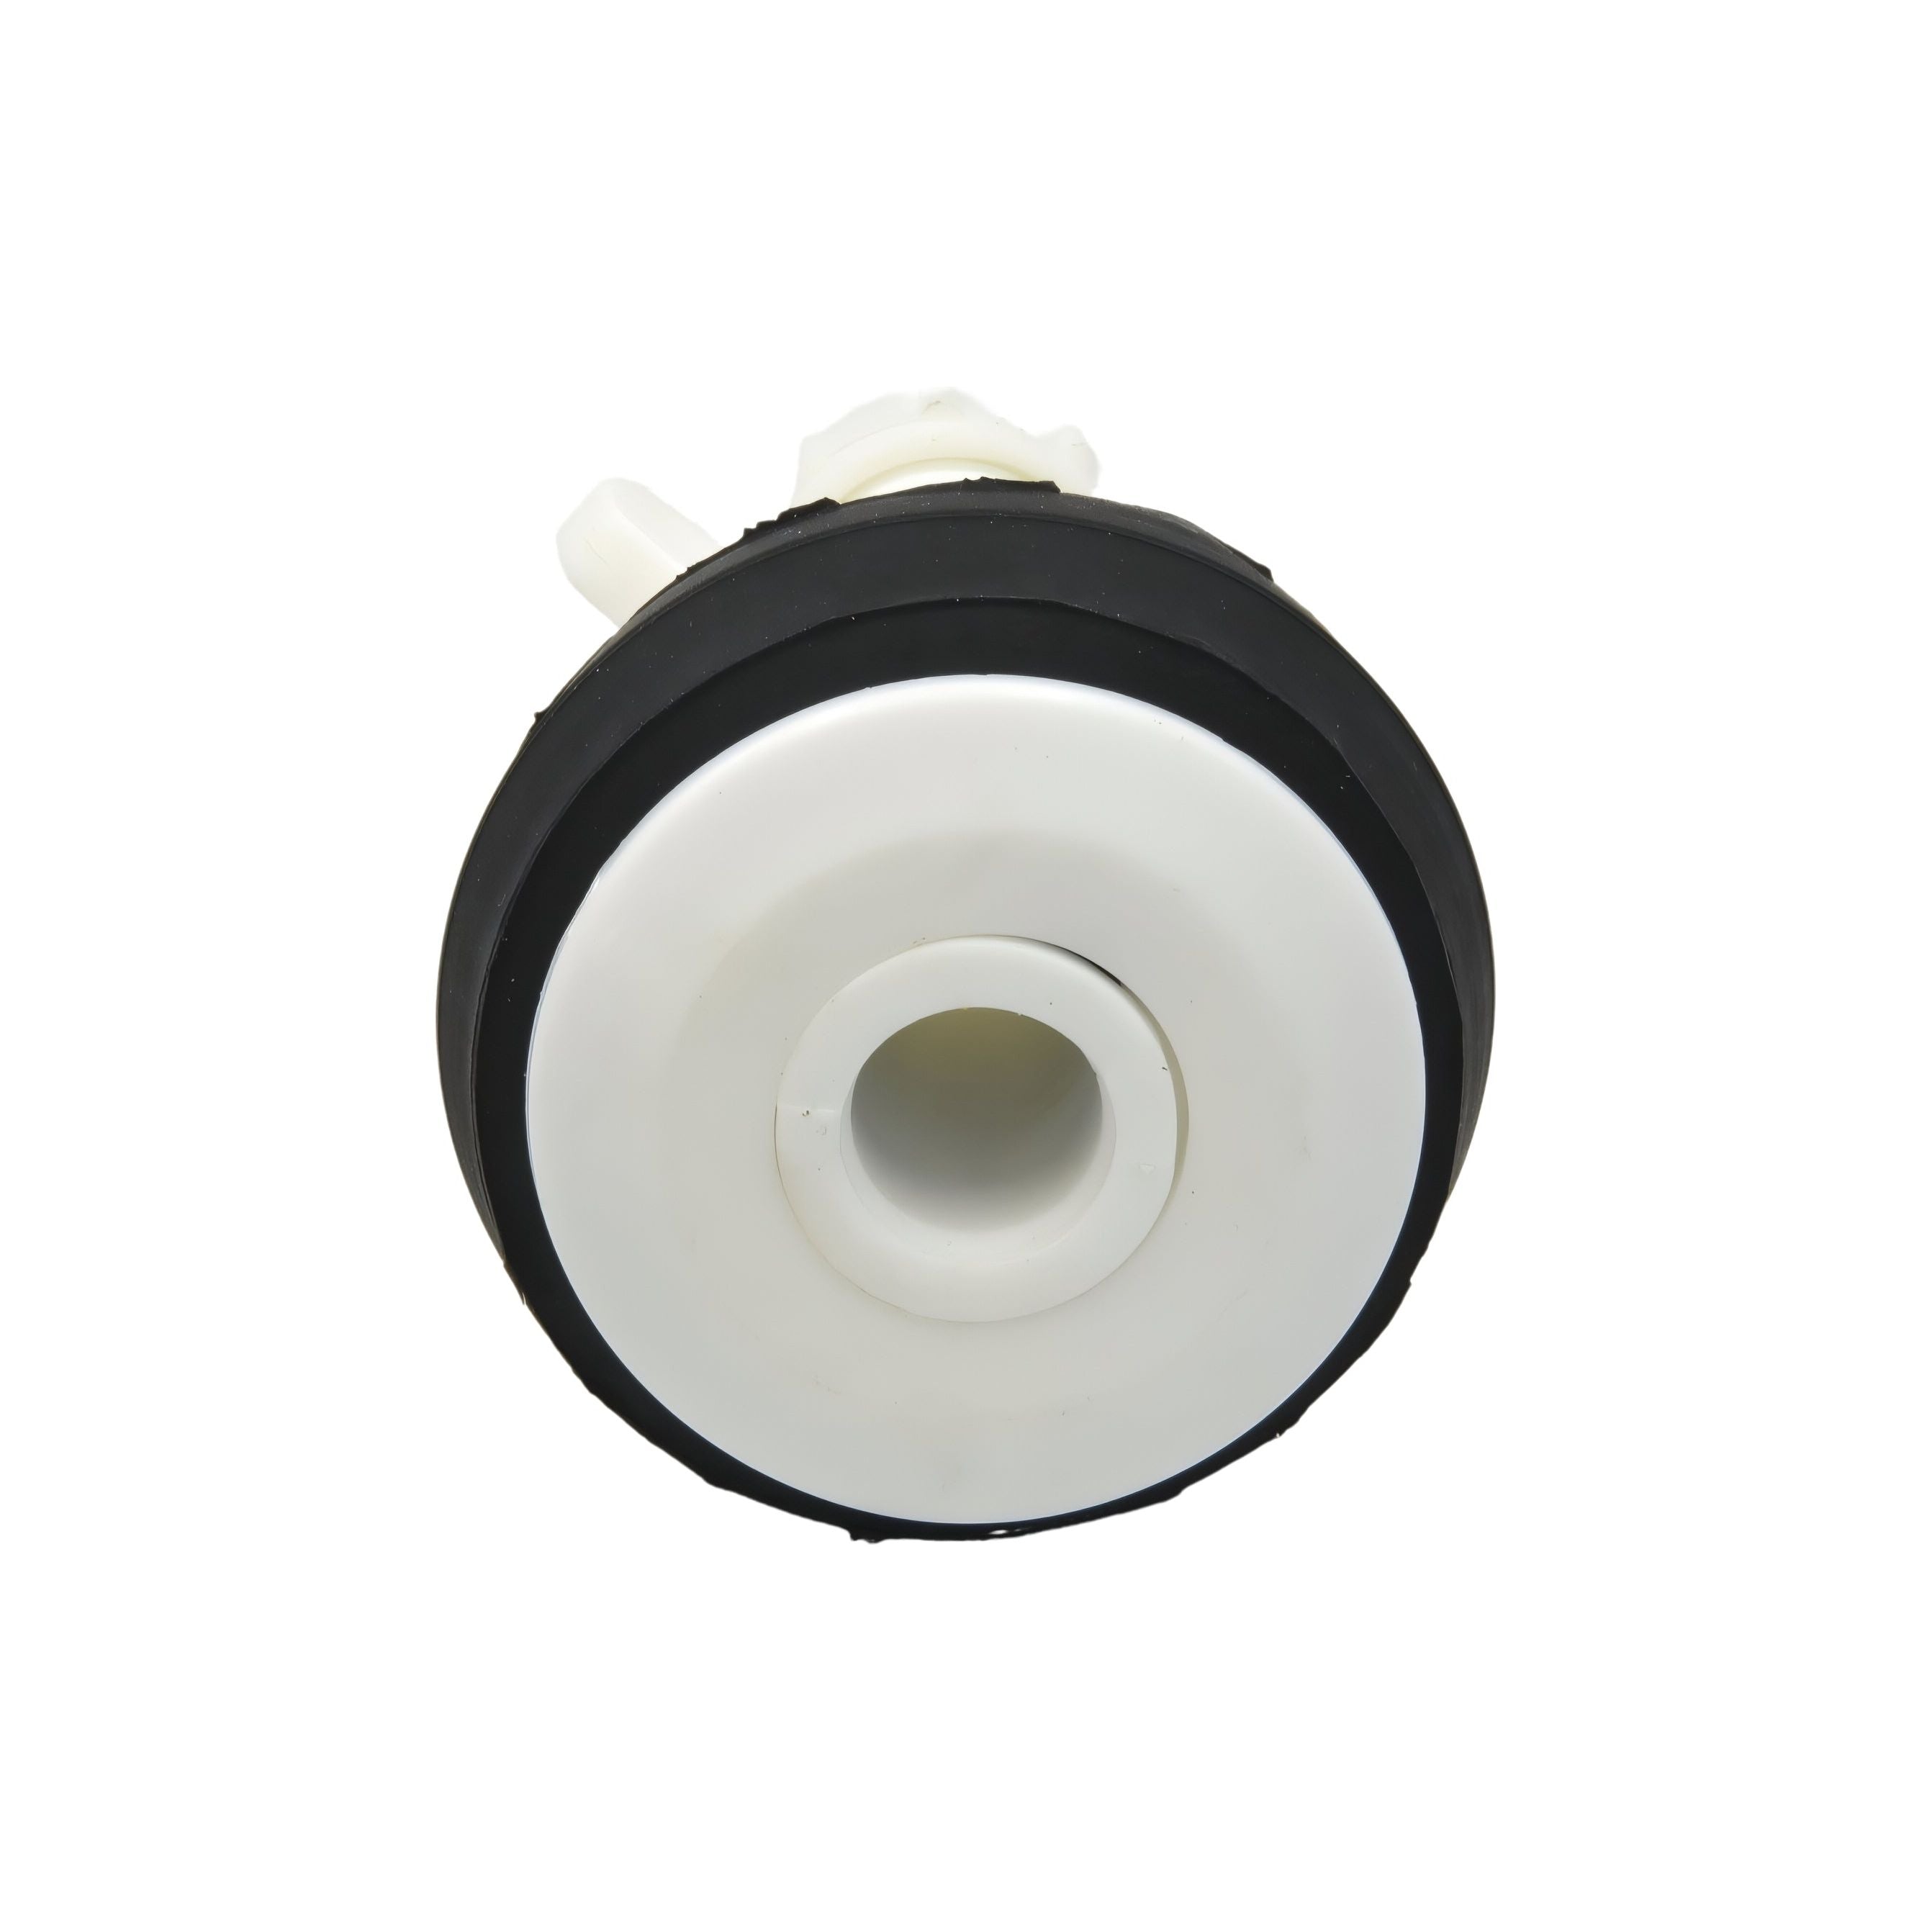 Nylon Mechanical Pipe Test plug bung with 13mm bypass 63mm to 76mm